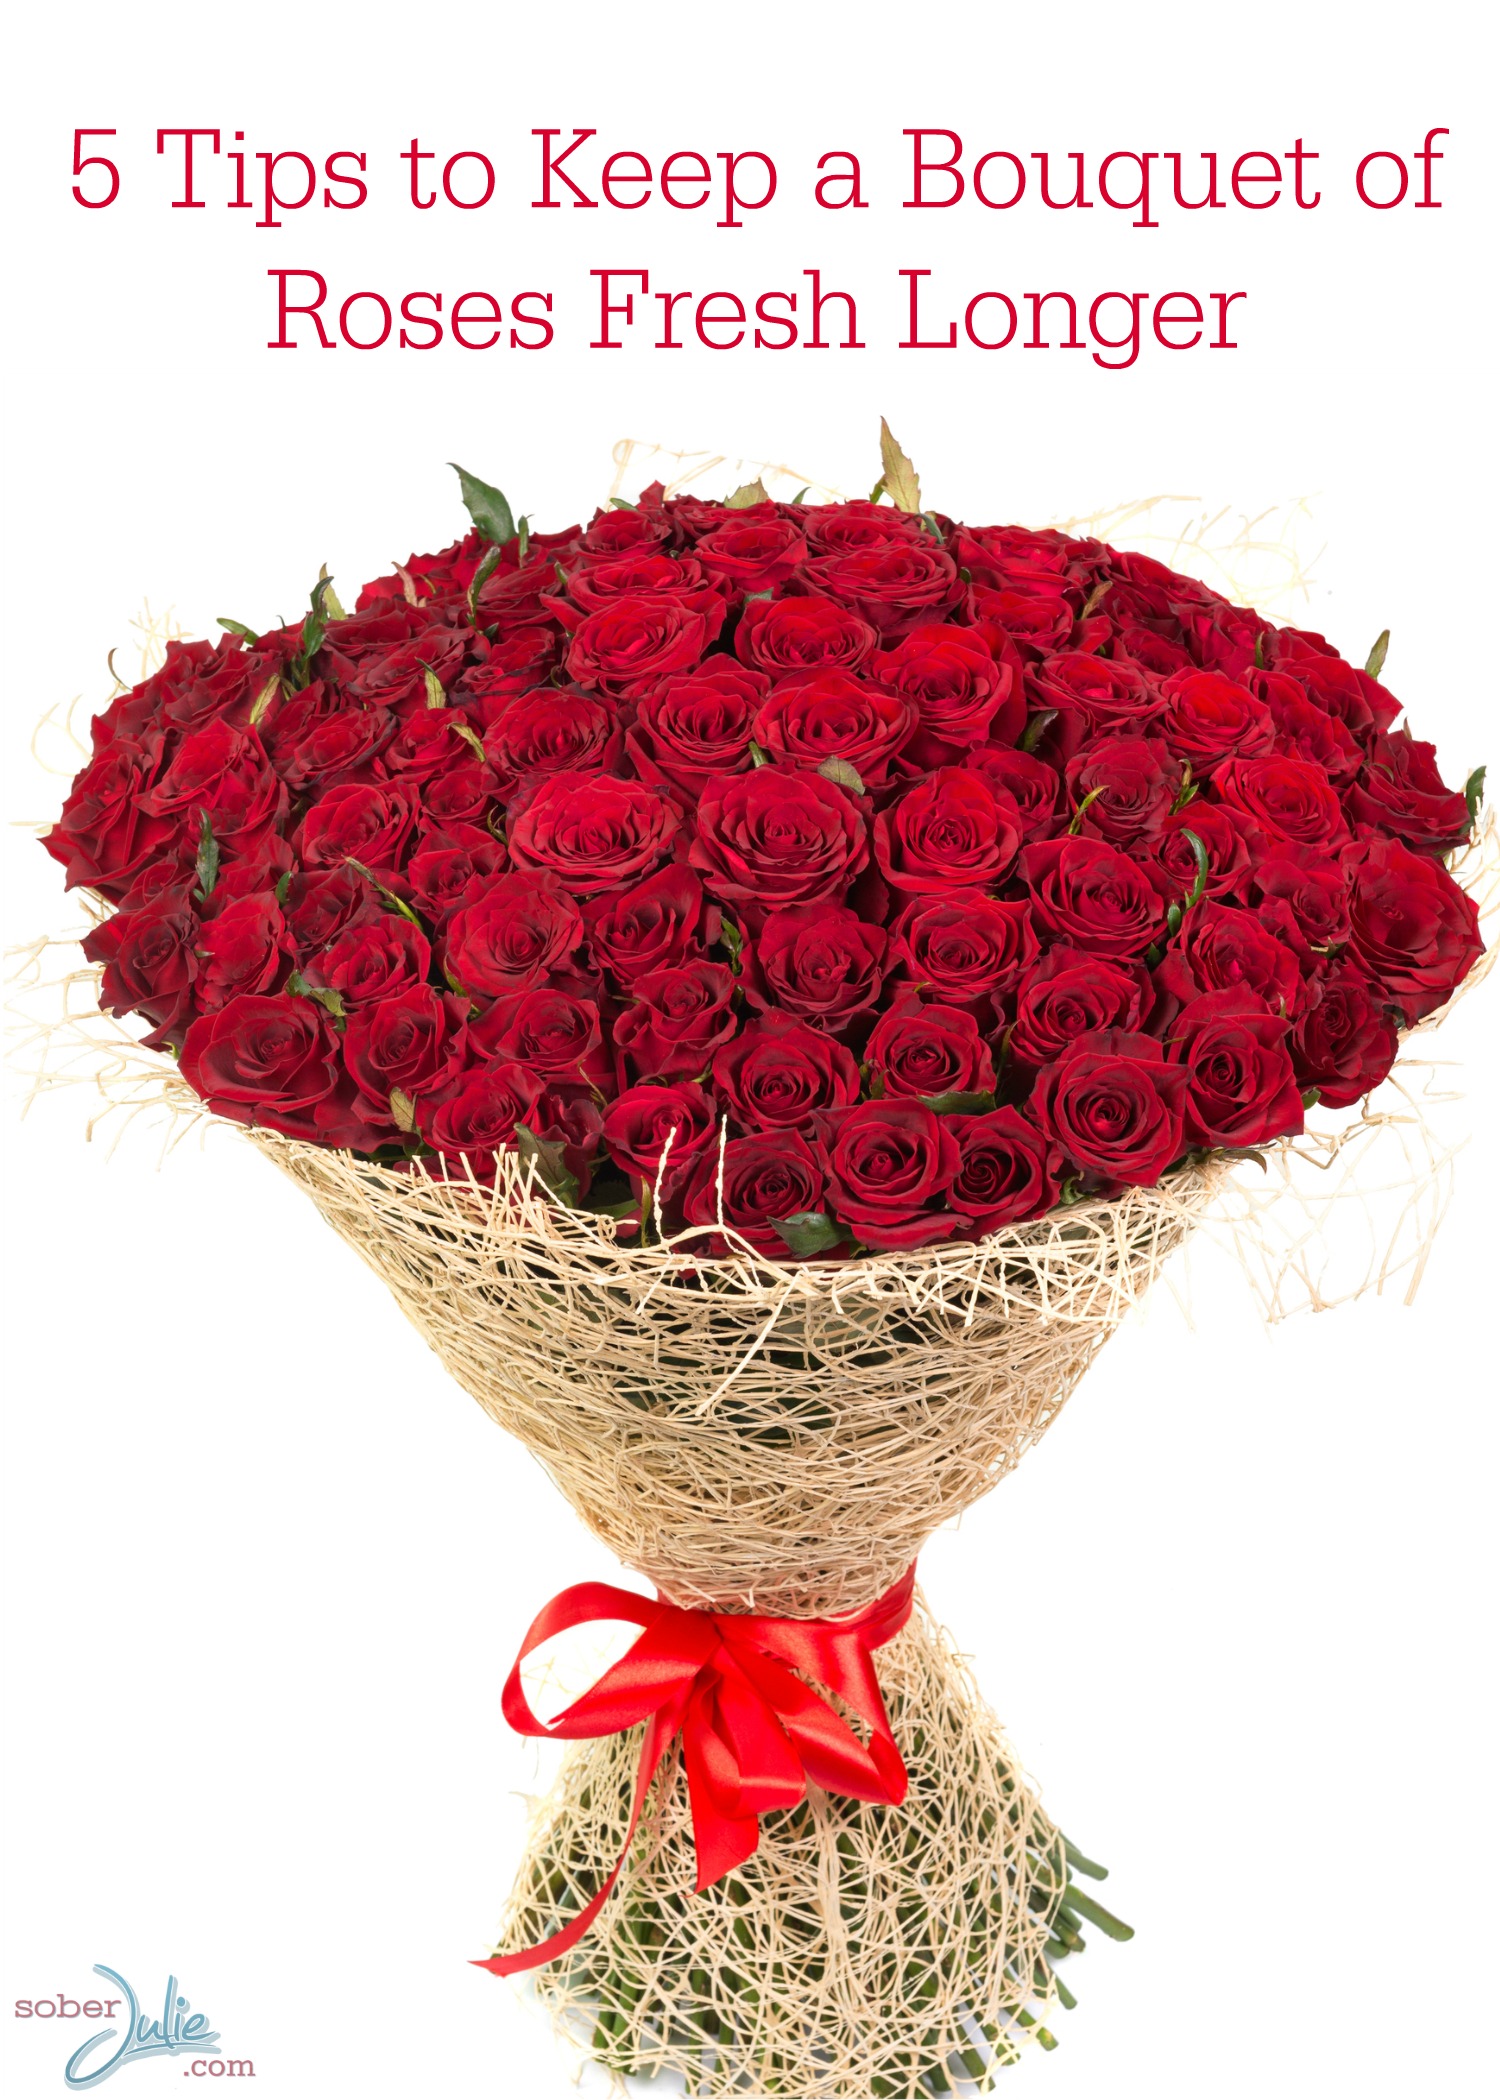 5 Tips to Keep a Bouquet of Roses Fresh Longer - Sober Julie